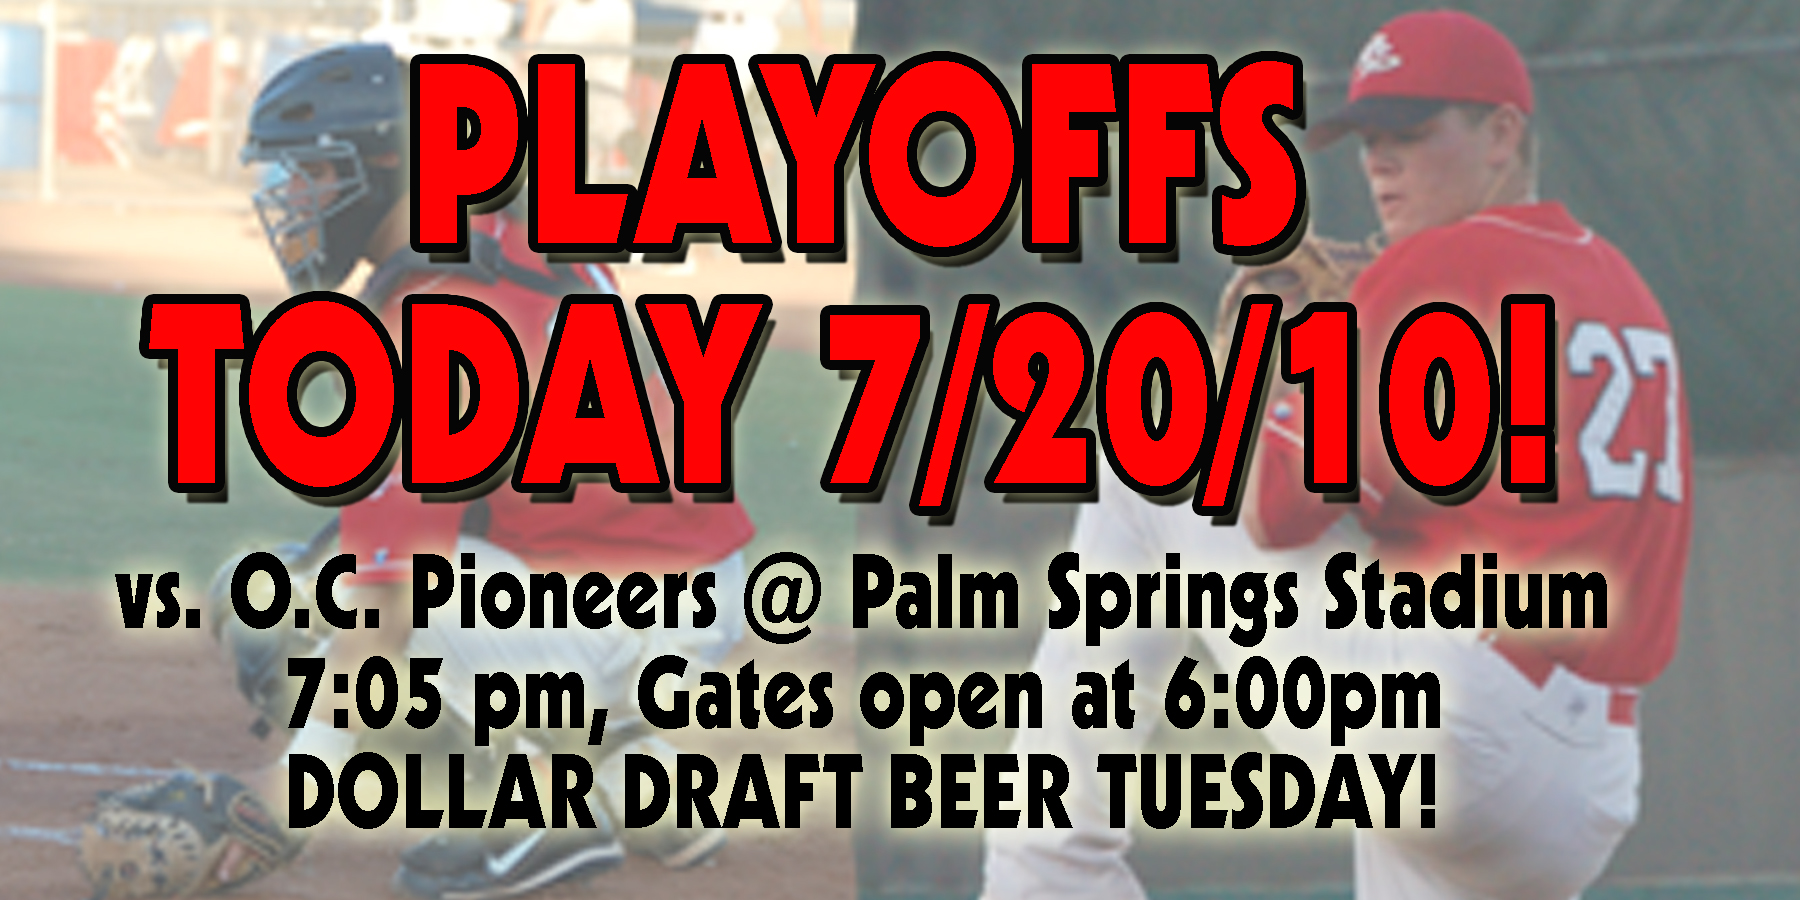 Game 1 of Playoffs set for 7:05pm, Tues. July 20 at Palm Springs Stadium